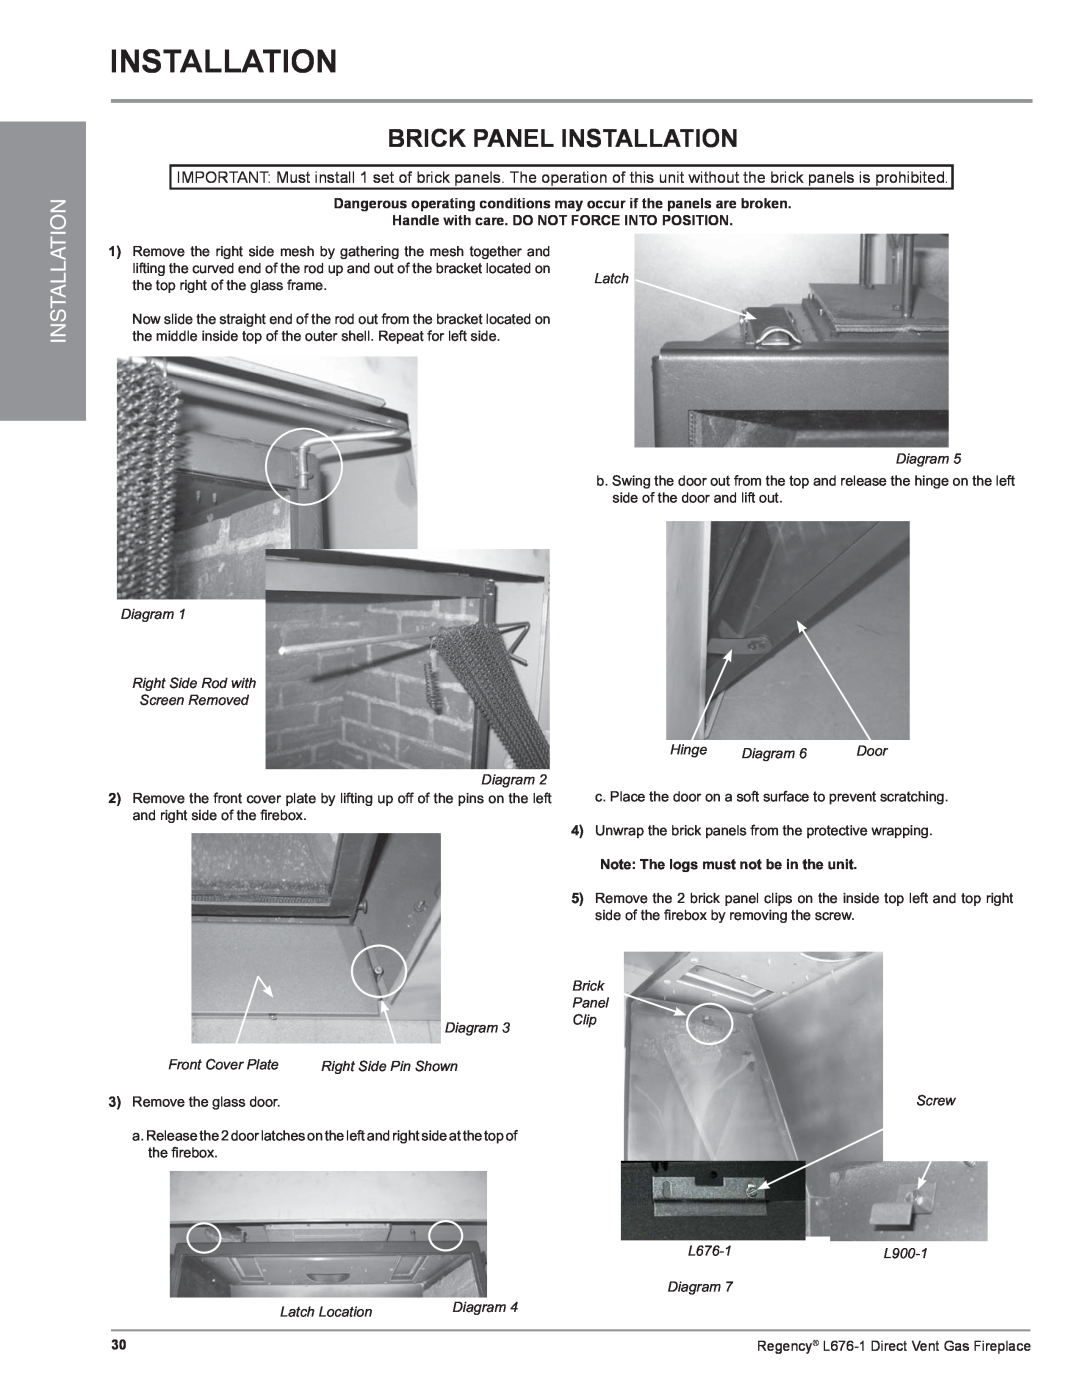 Regency L676-NG1 Brick Panel Installation, Handle with care. DO NOT FORCE INTO POSITION, Latch Diagram, Hinge 